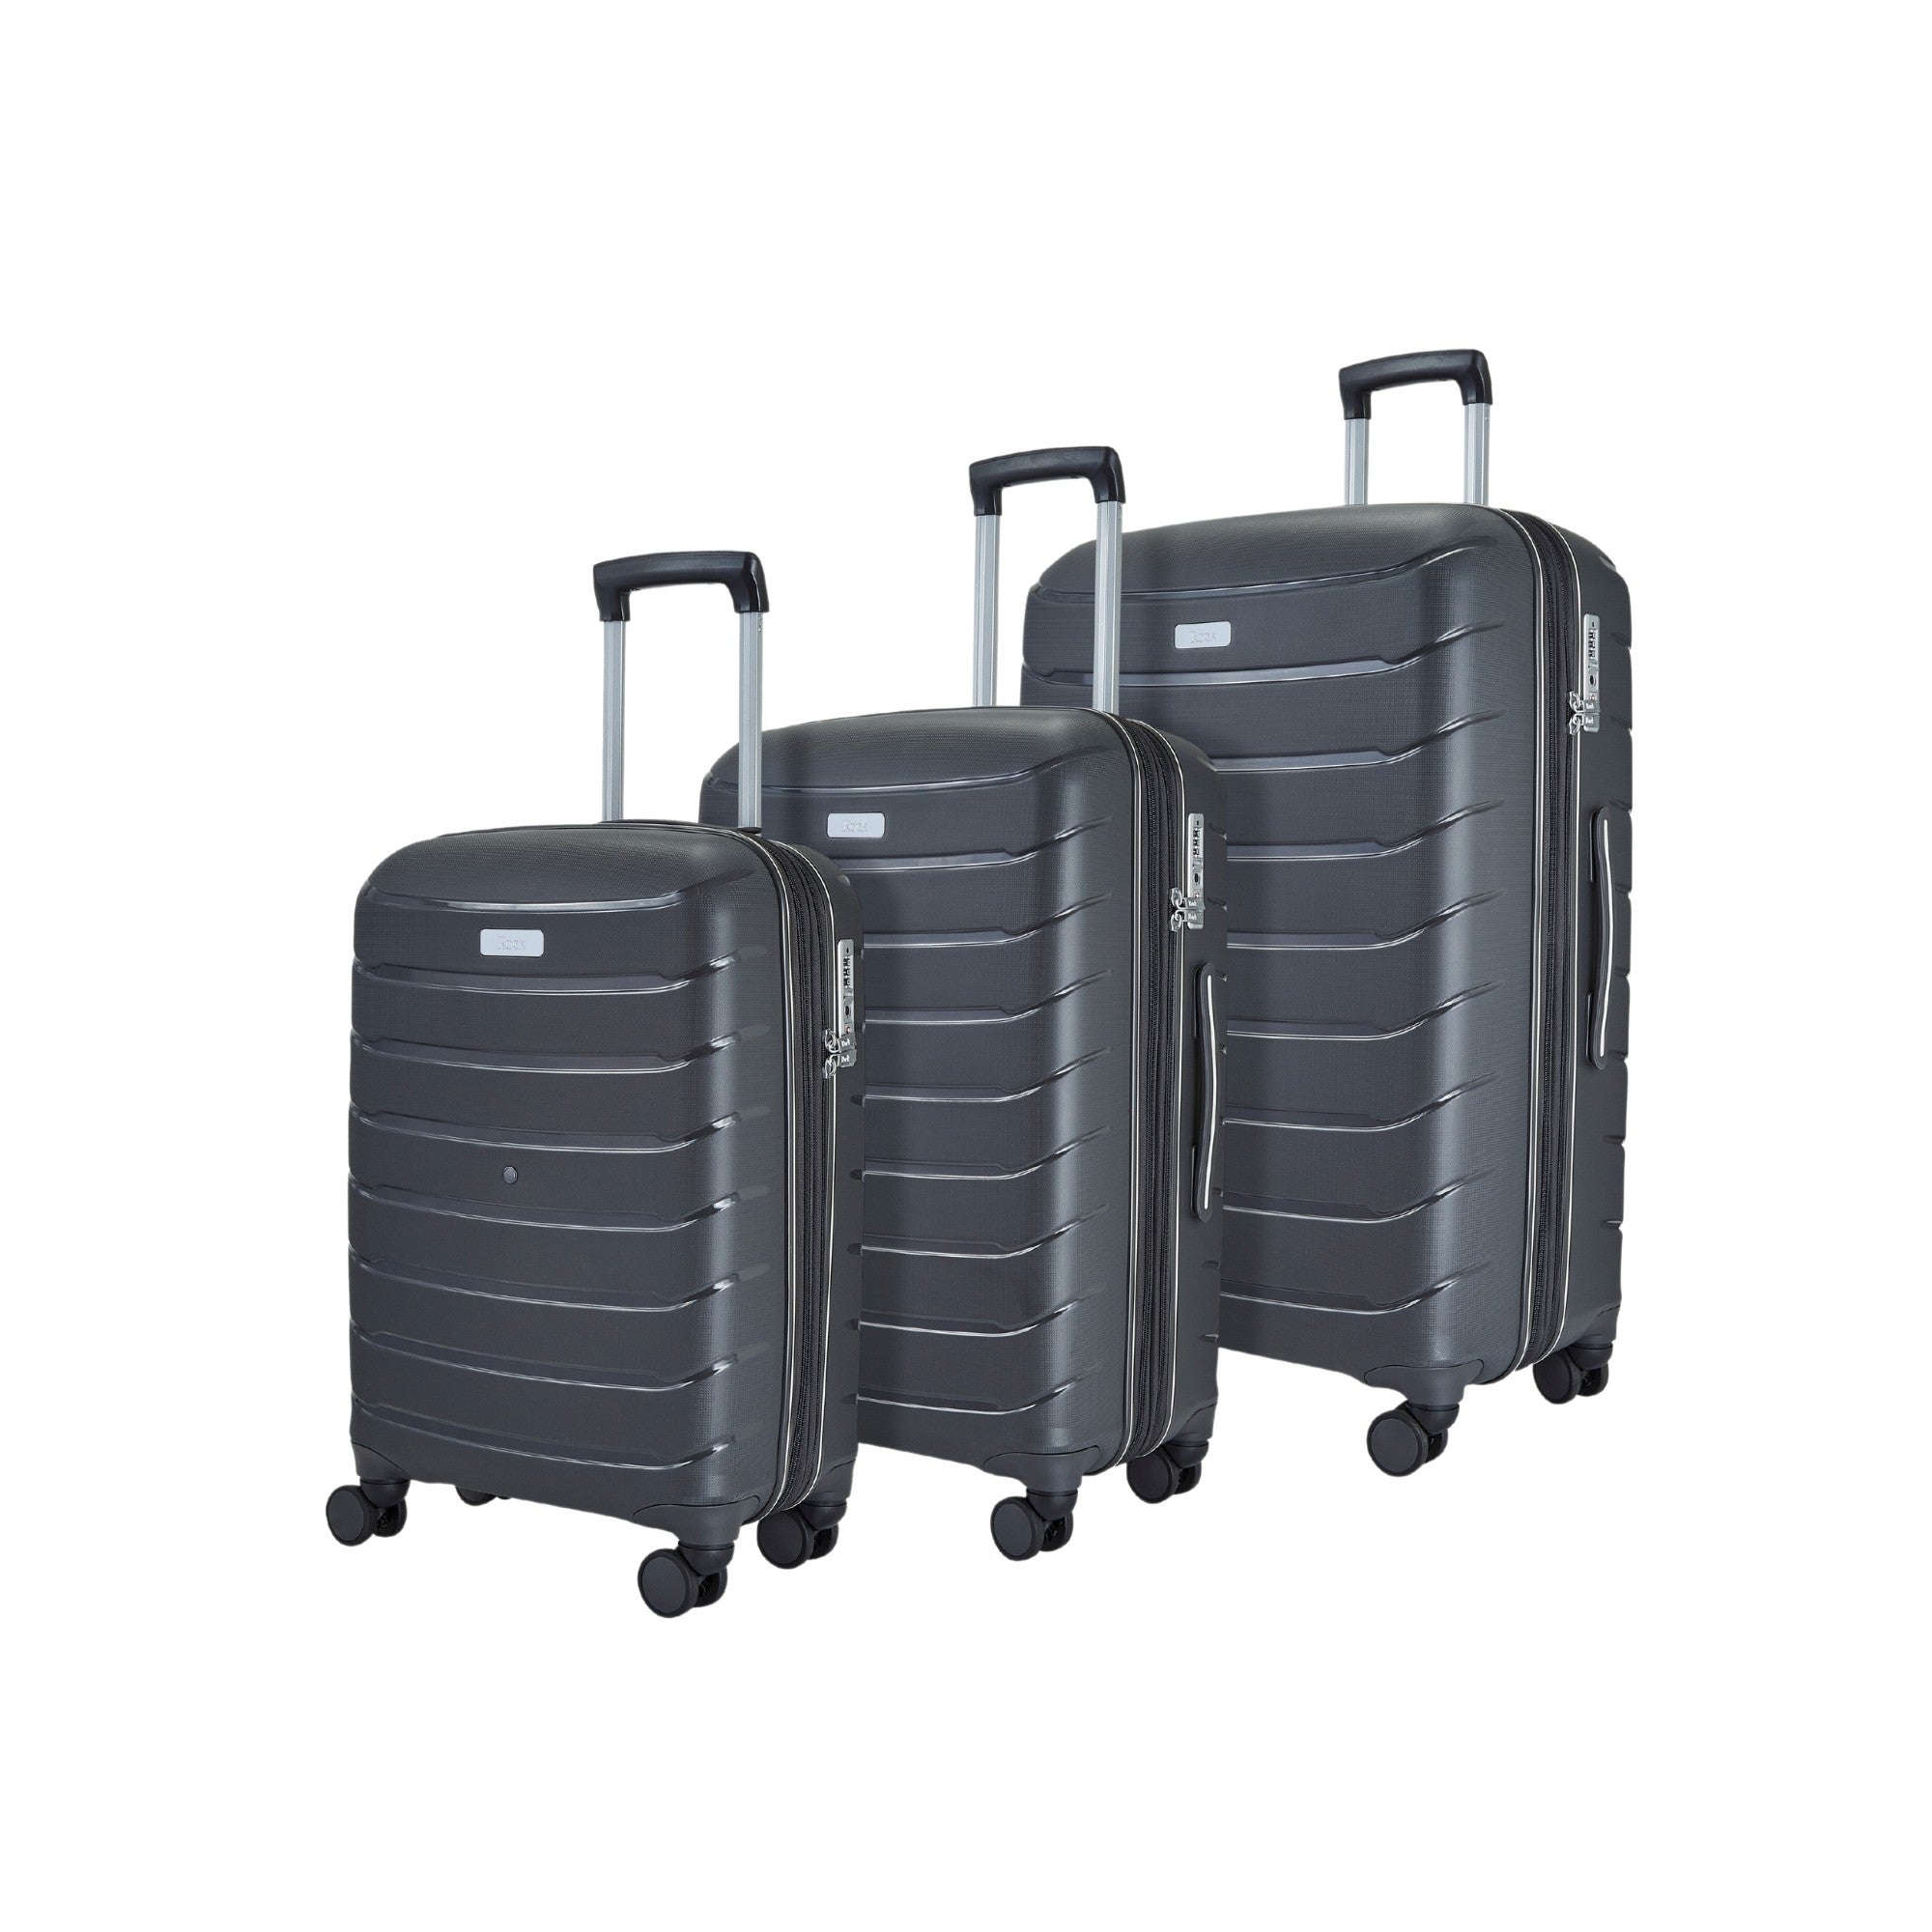 Rock Luggage Prime Set of 3 Suitcases Charcoal